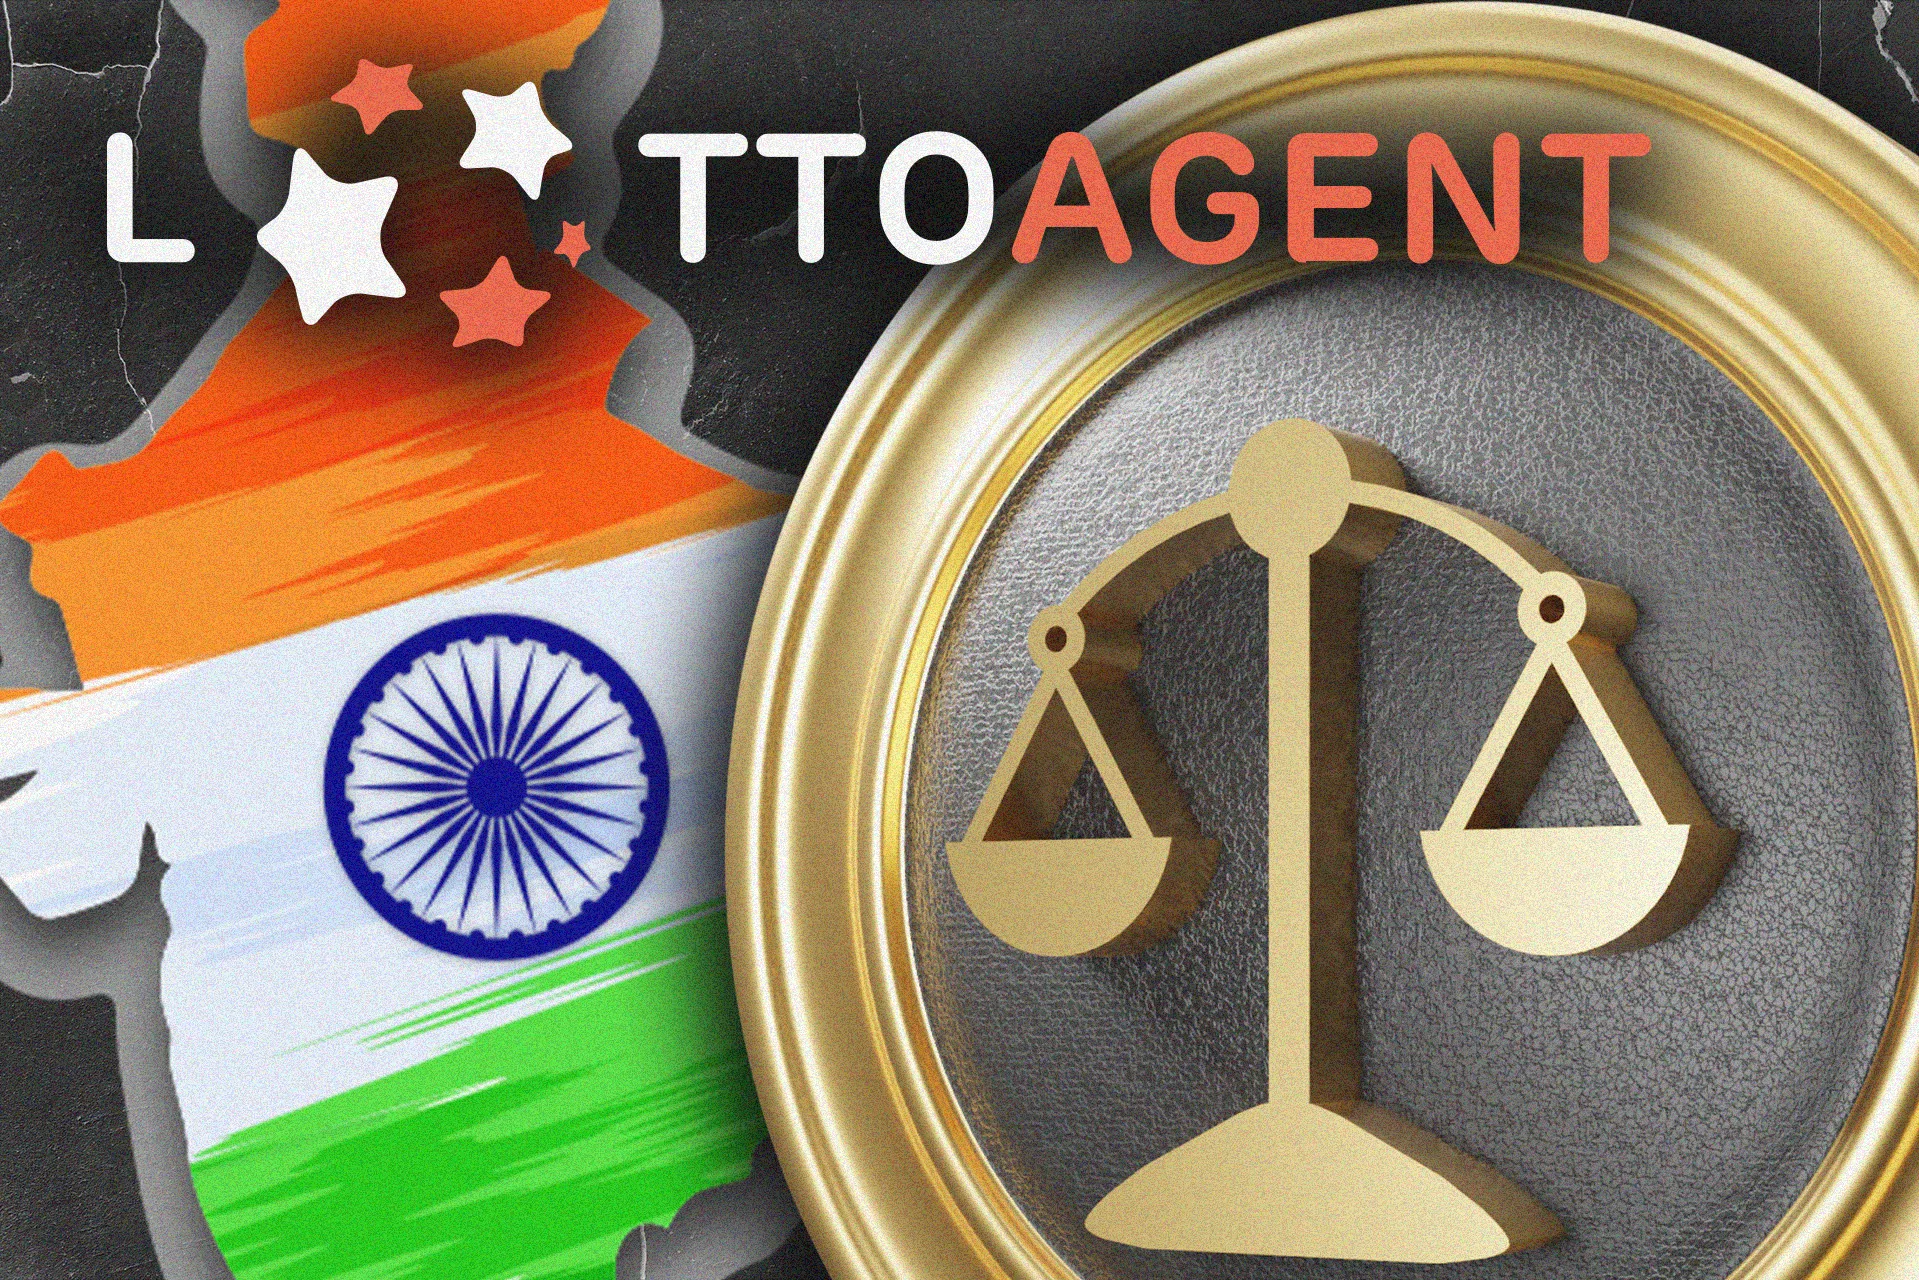 Lotto Agent is absolutely legal to play from India.